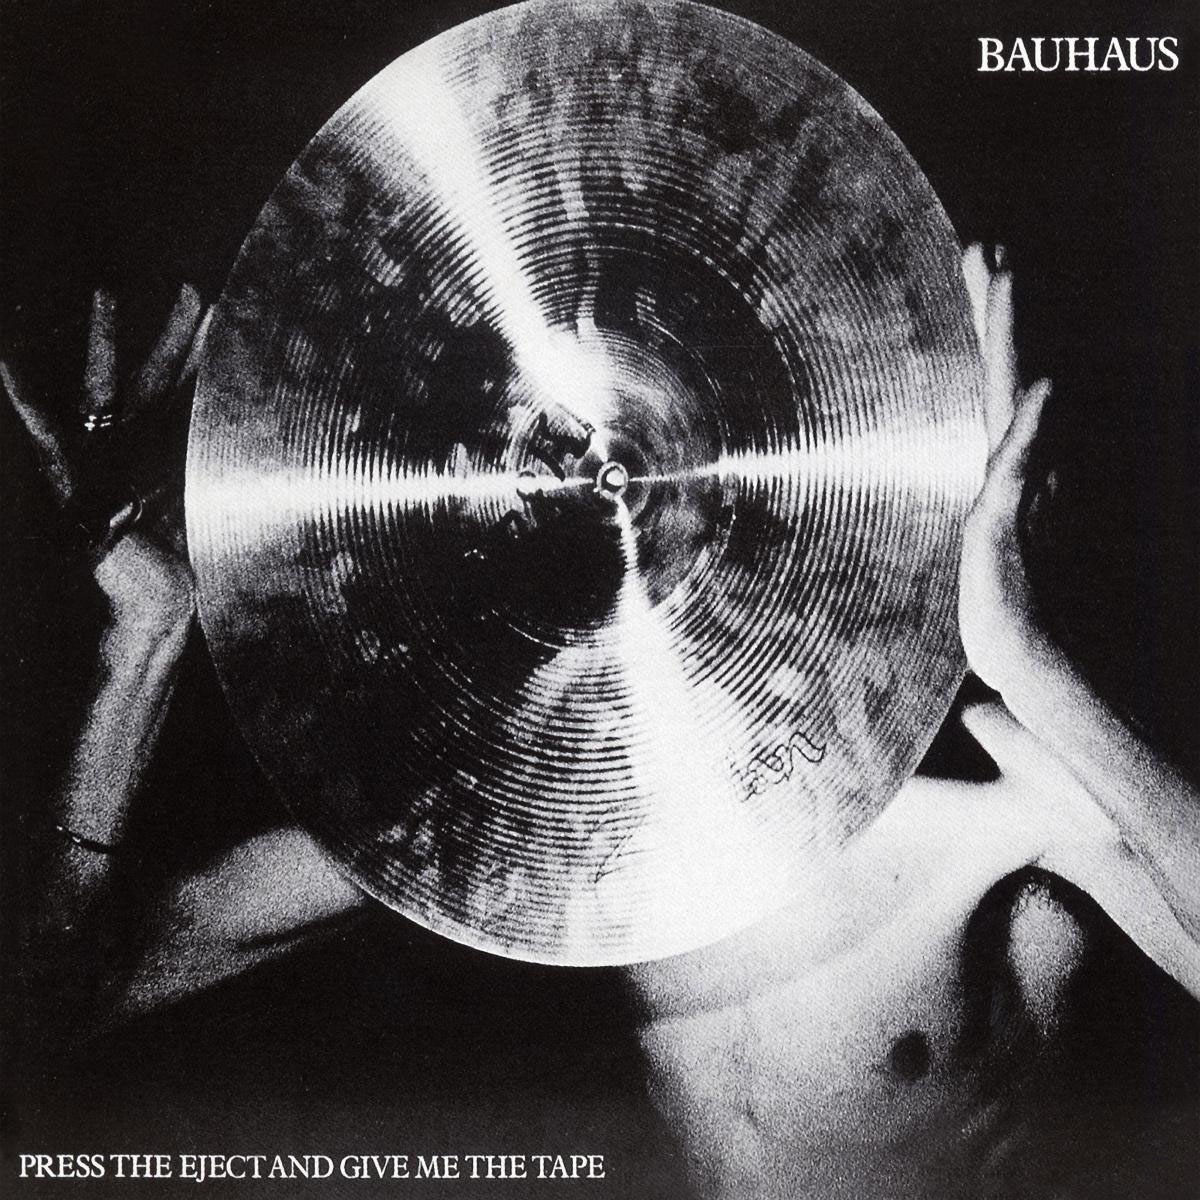 Bauhaus- Press The Eject And Give Me The Tape LP (White Vinyl)